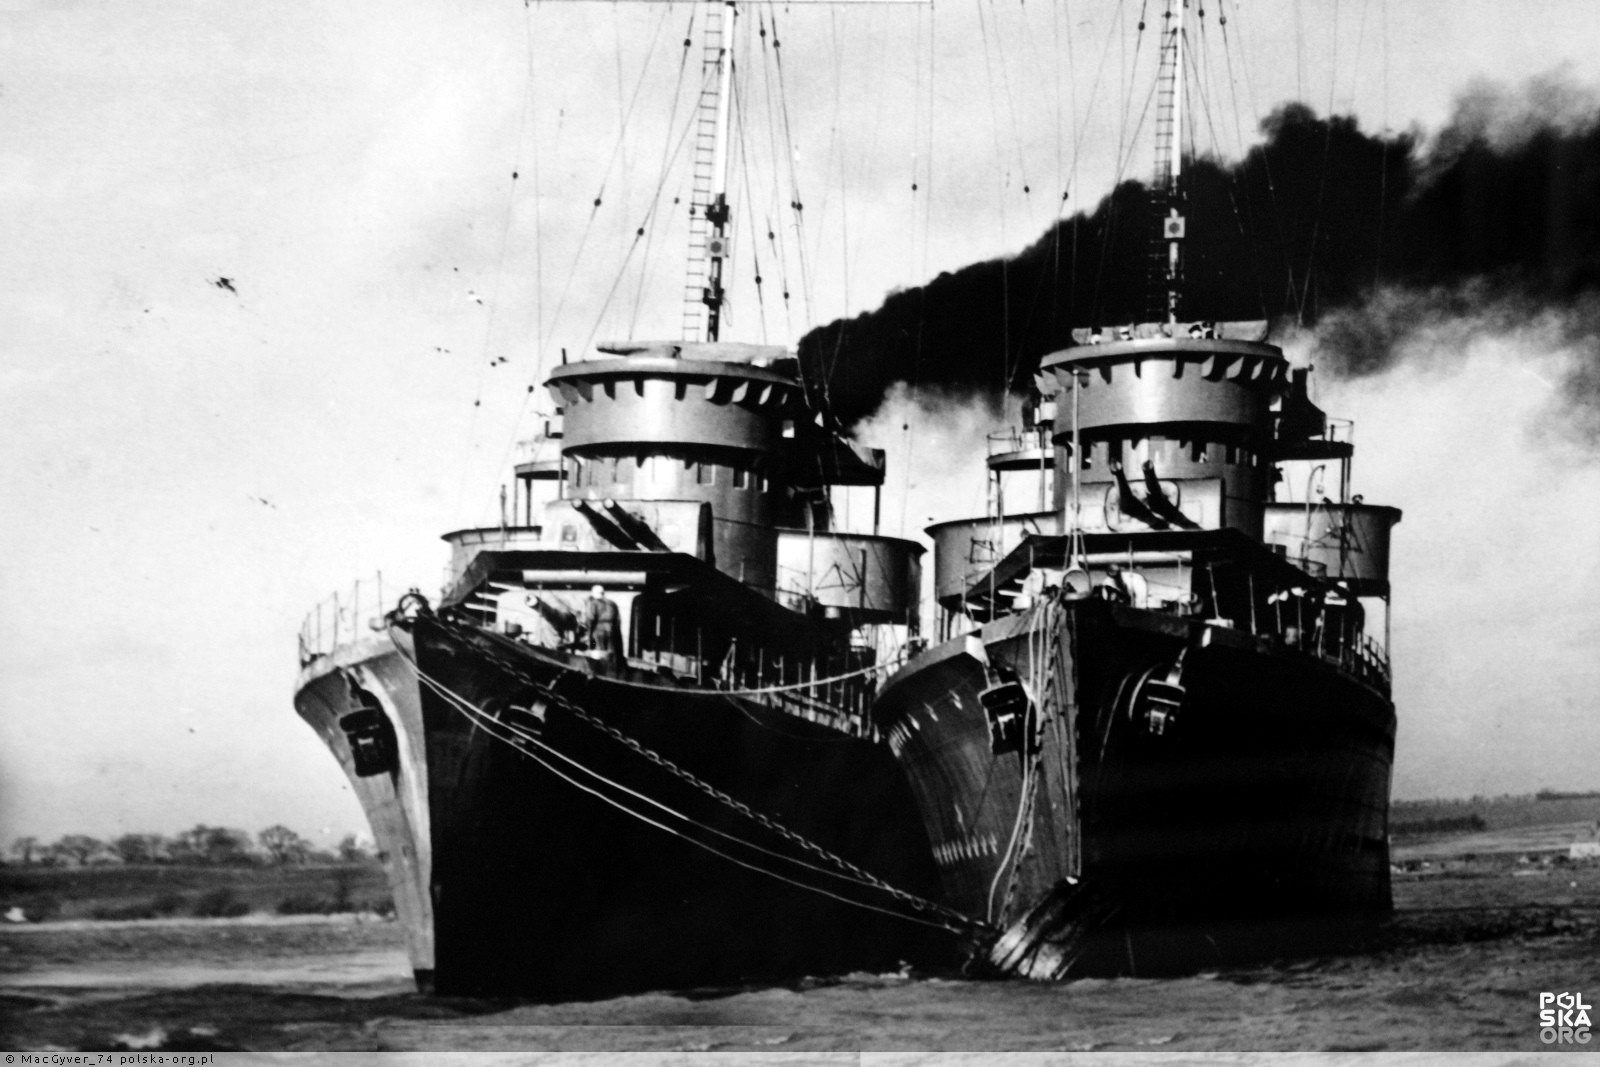 Destroyers „Błyskawica” and "Grom" at the Plymouth roadstead (October 1939). Source polska-org.pl